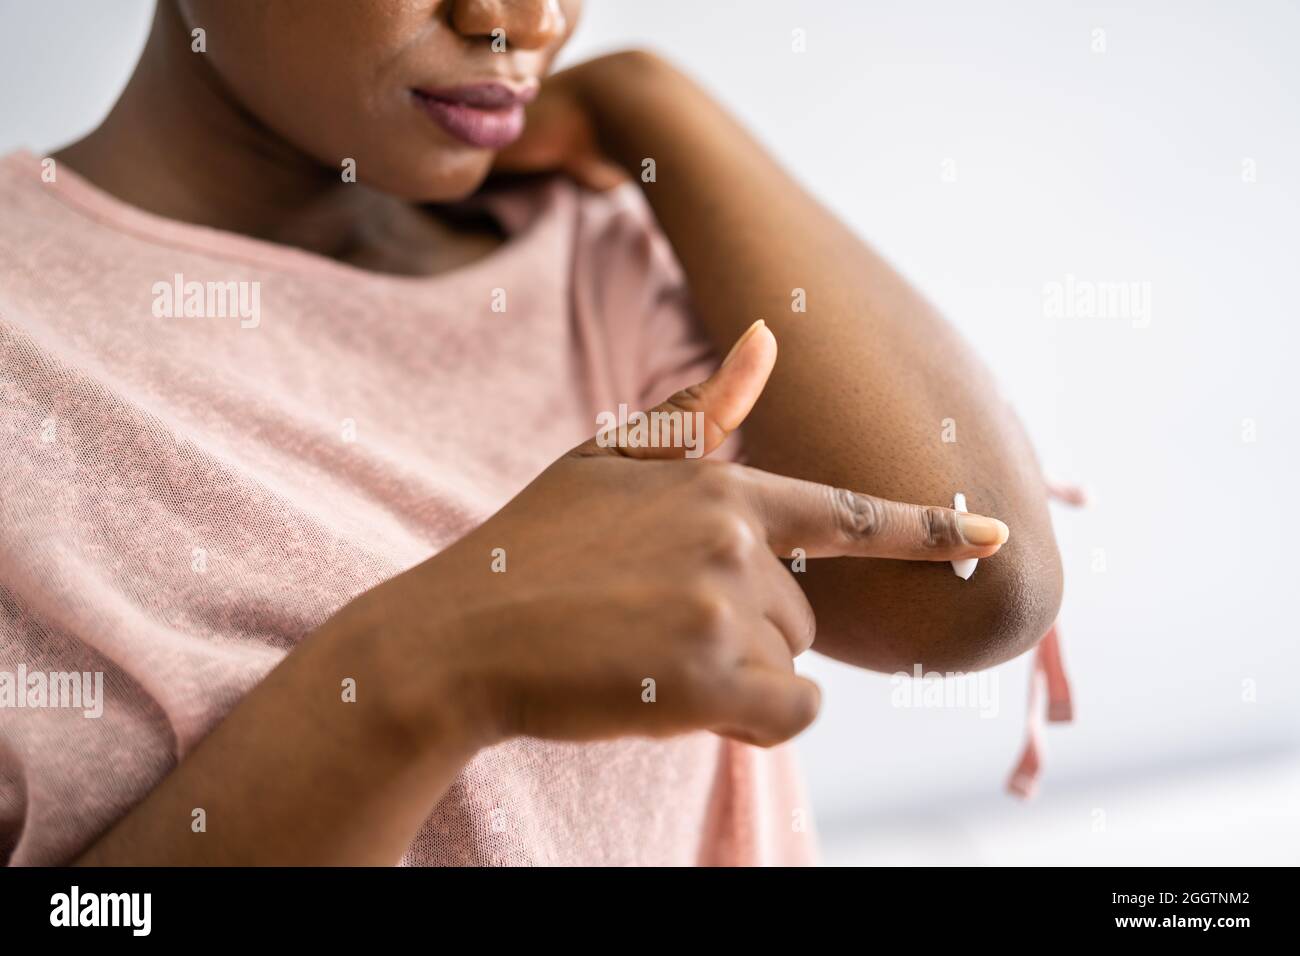 American African Woman Hand Care Cream To Skin Stock Photo